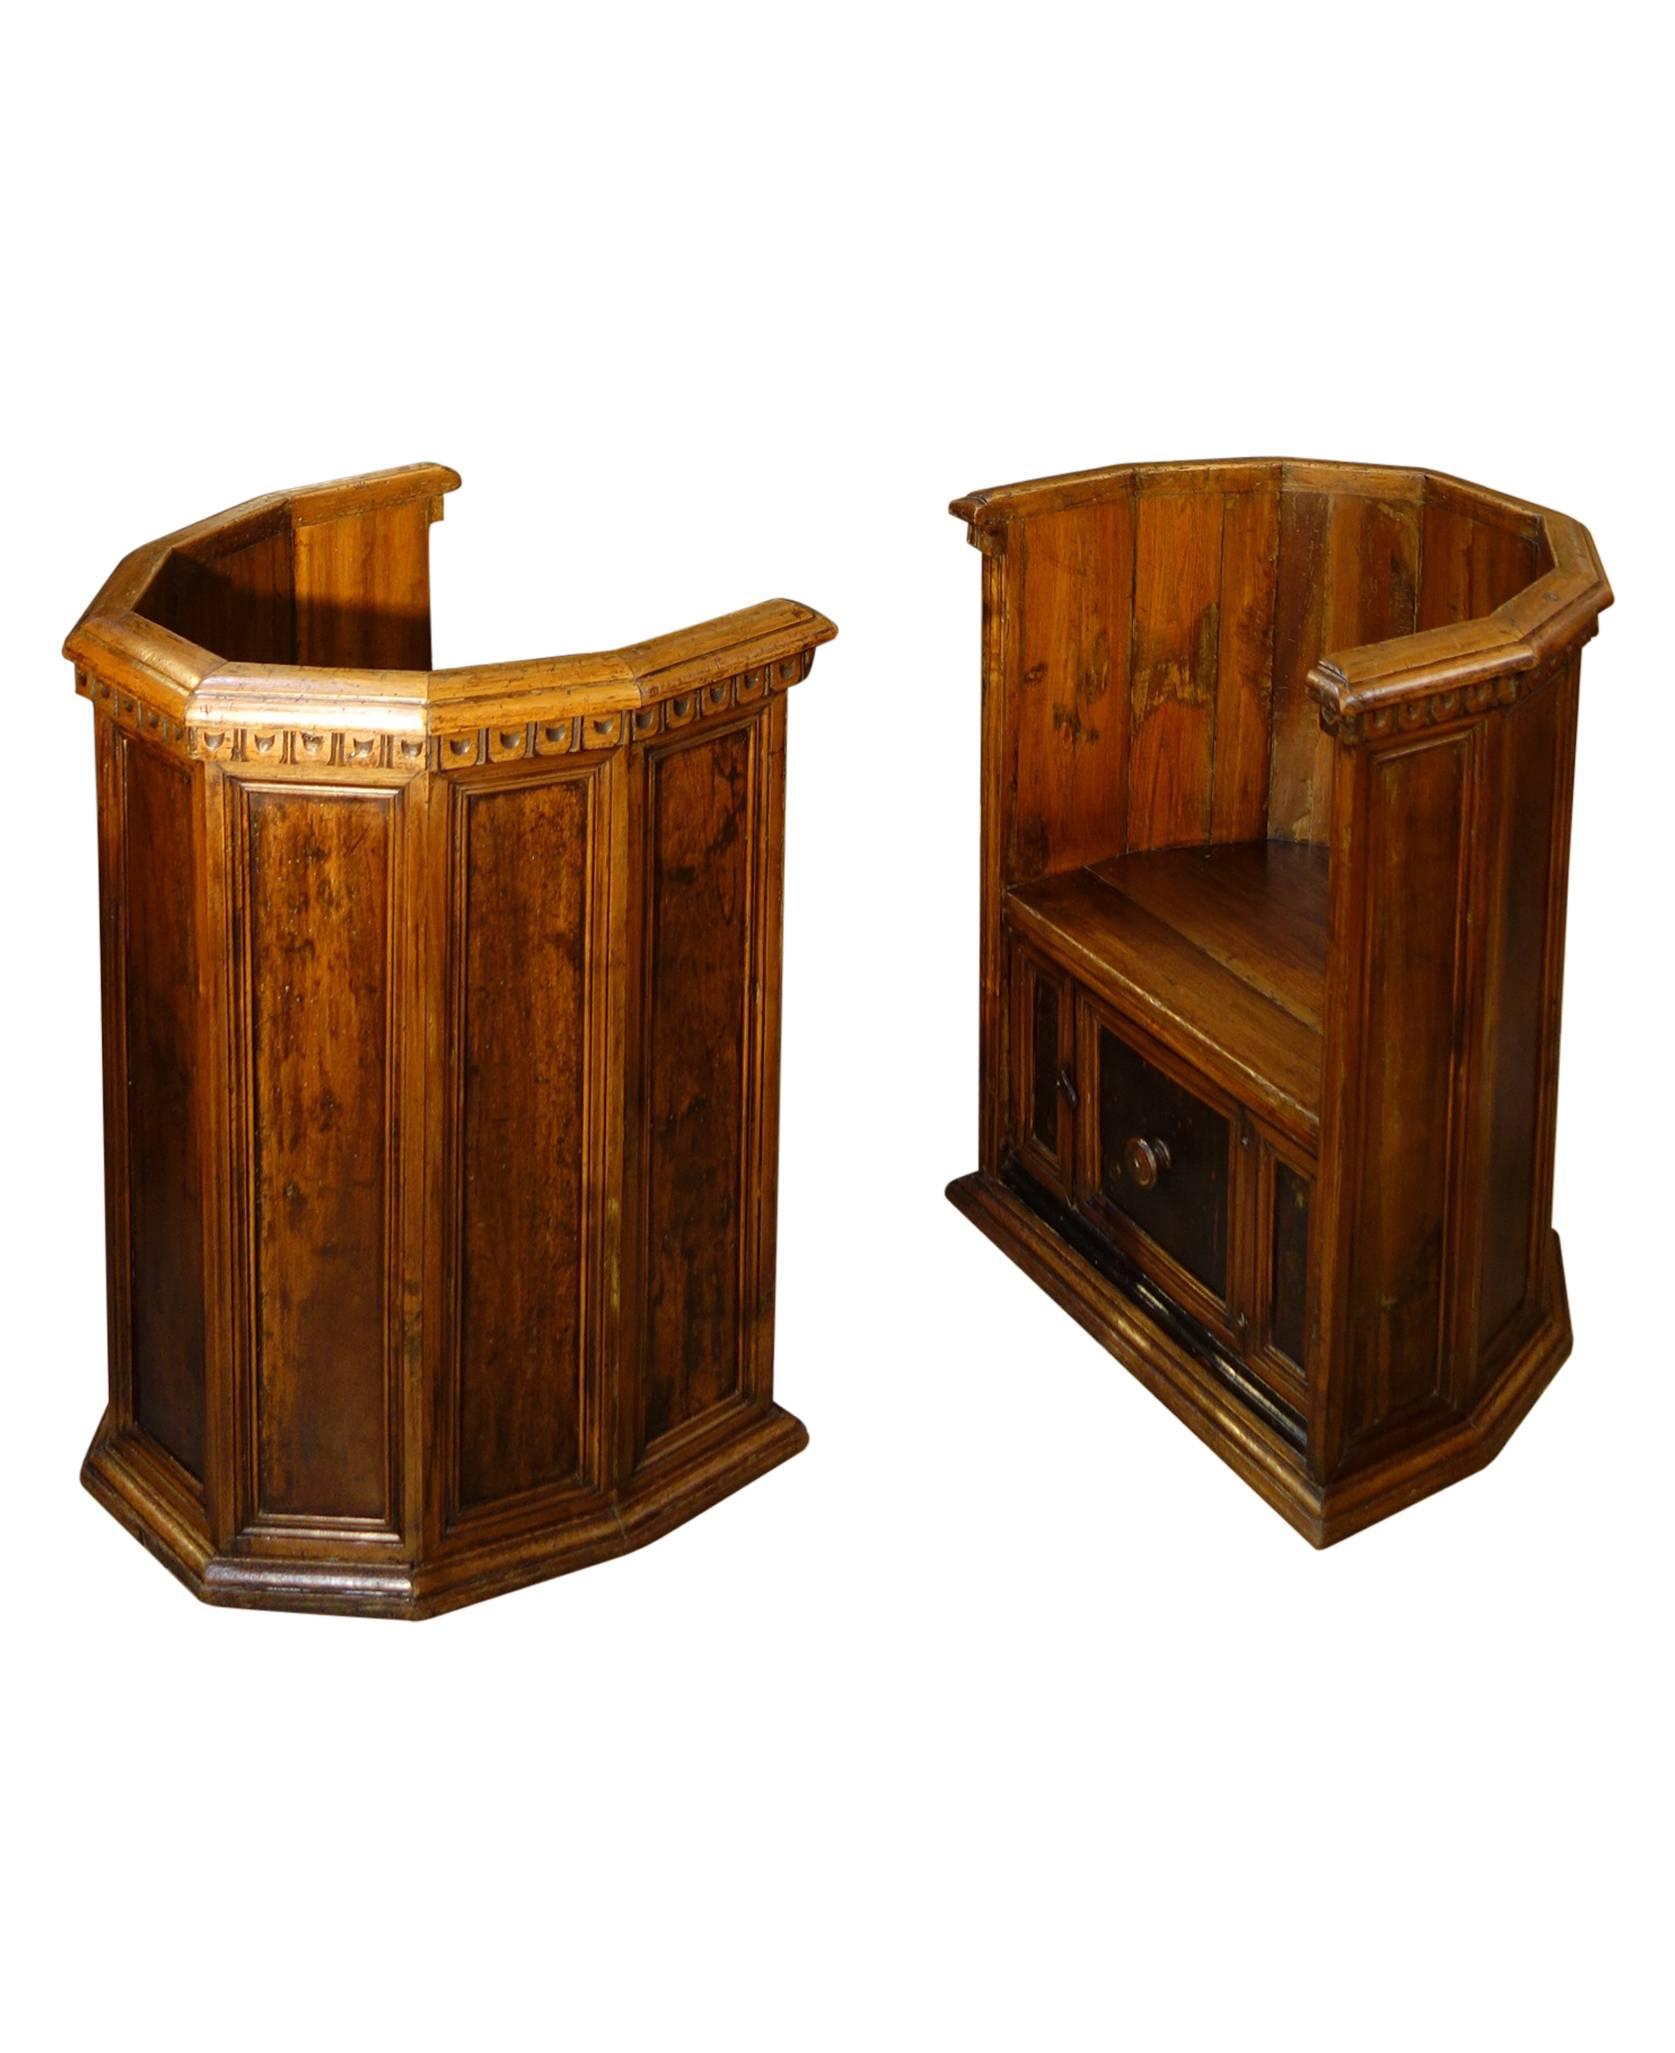 Pozzetto shape 15th Century Style Florentine room chairs.
Rare, hand-carved walnut Italian polygonal-shape chairs with seven panel back segments and hinged door revealing storage beneath the seat. Original design from the 1400s. Similar to one in